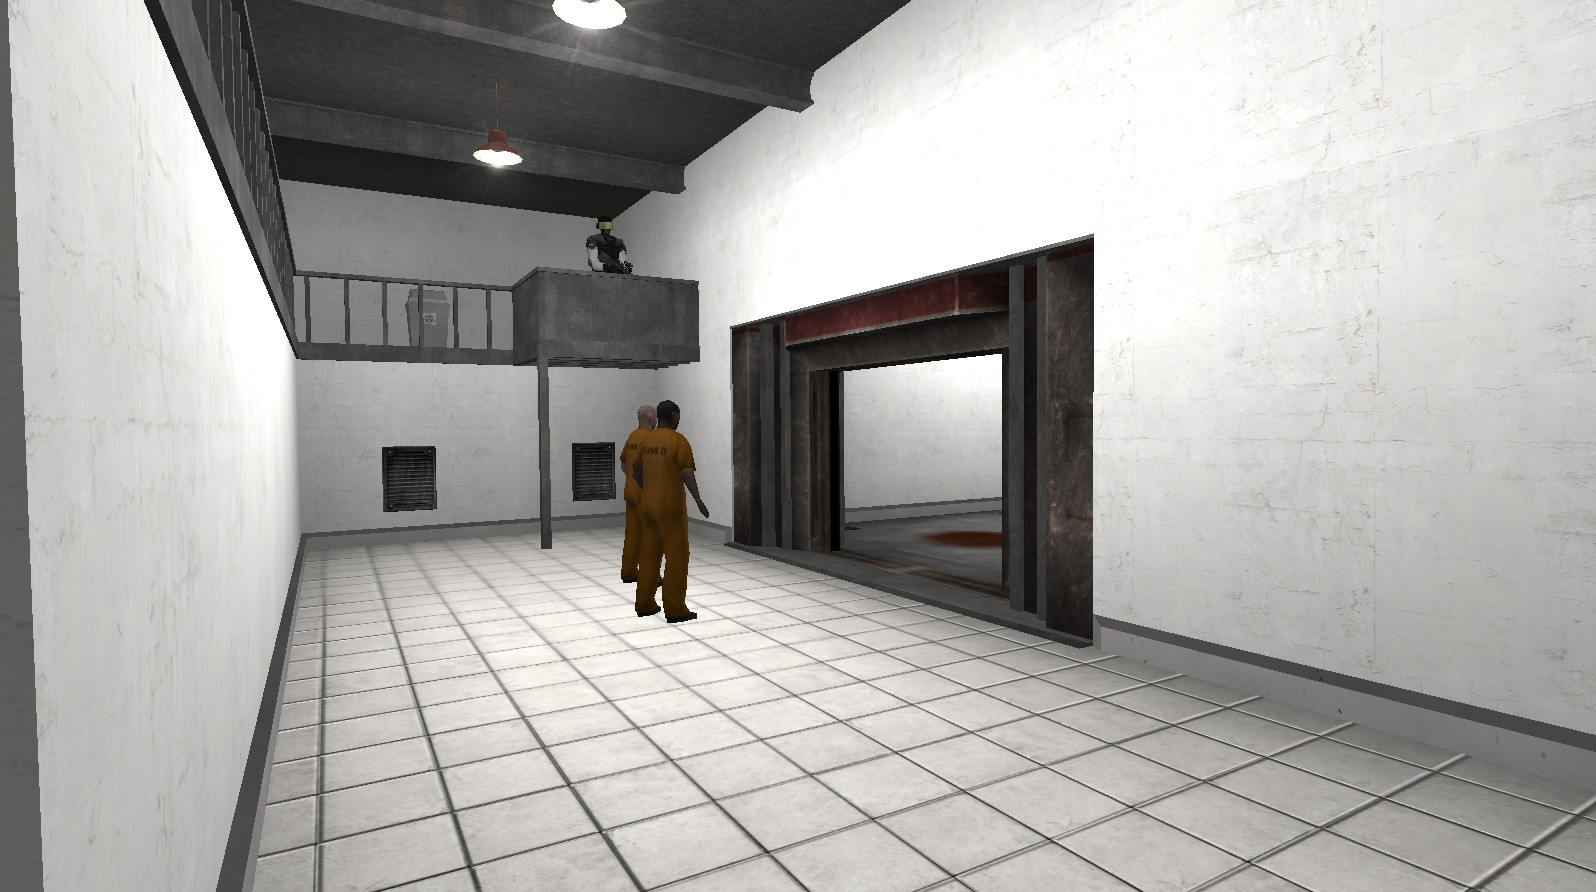 SCP Containment Breach Multiplayer: How to Play with Your Friends